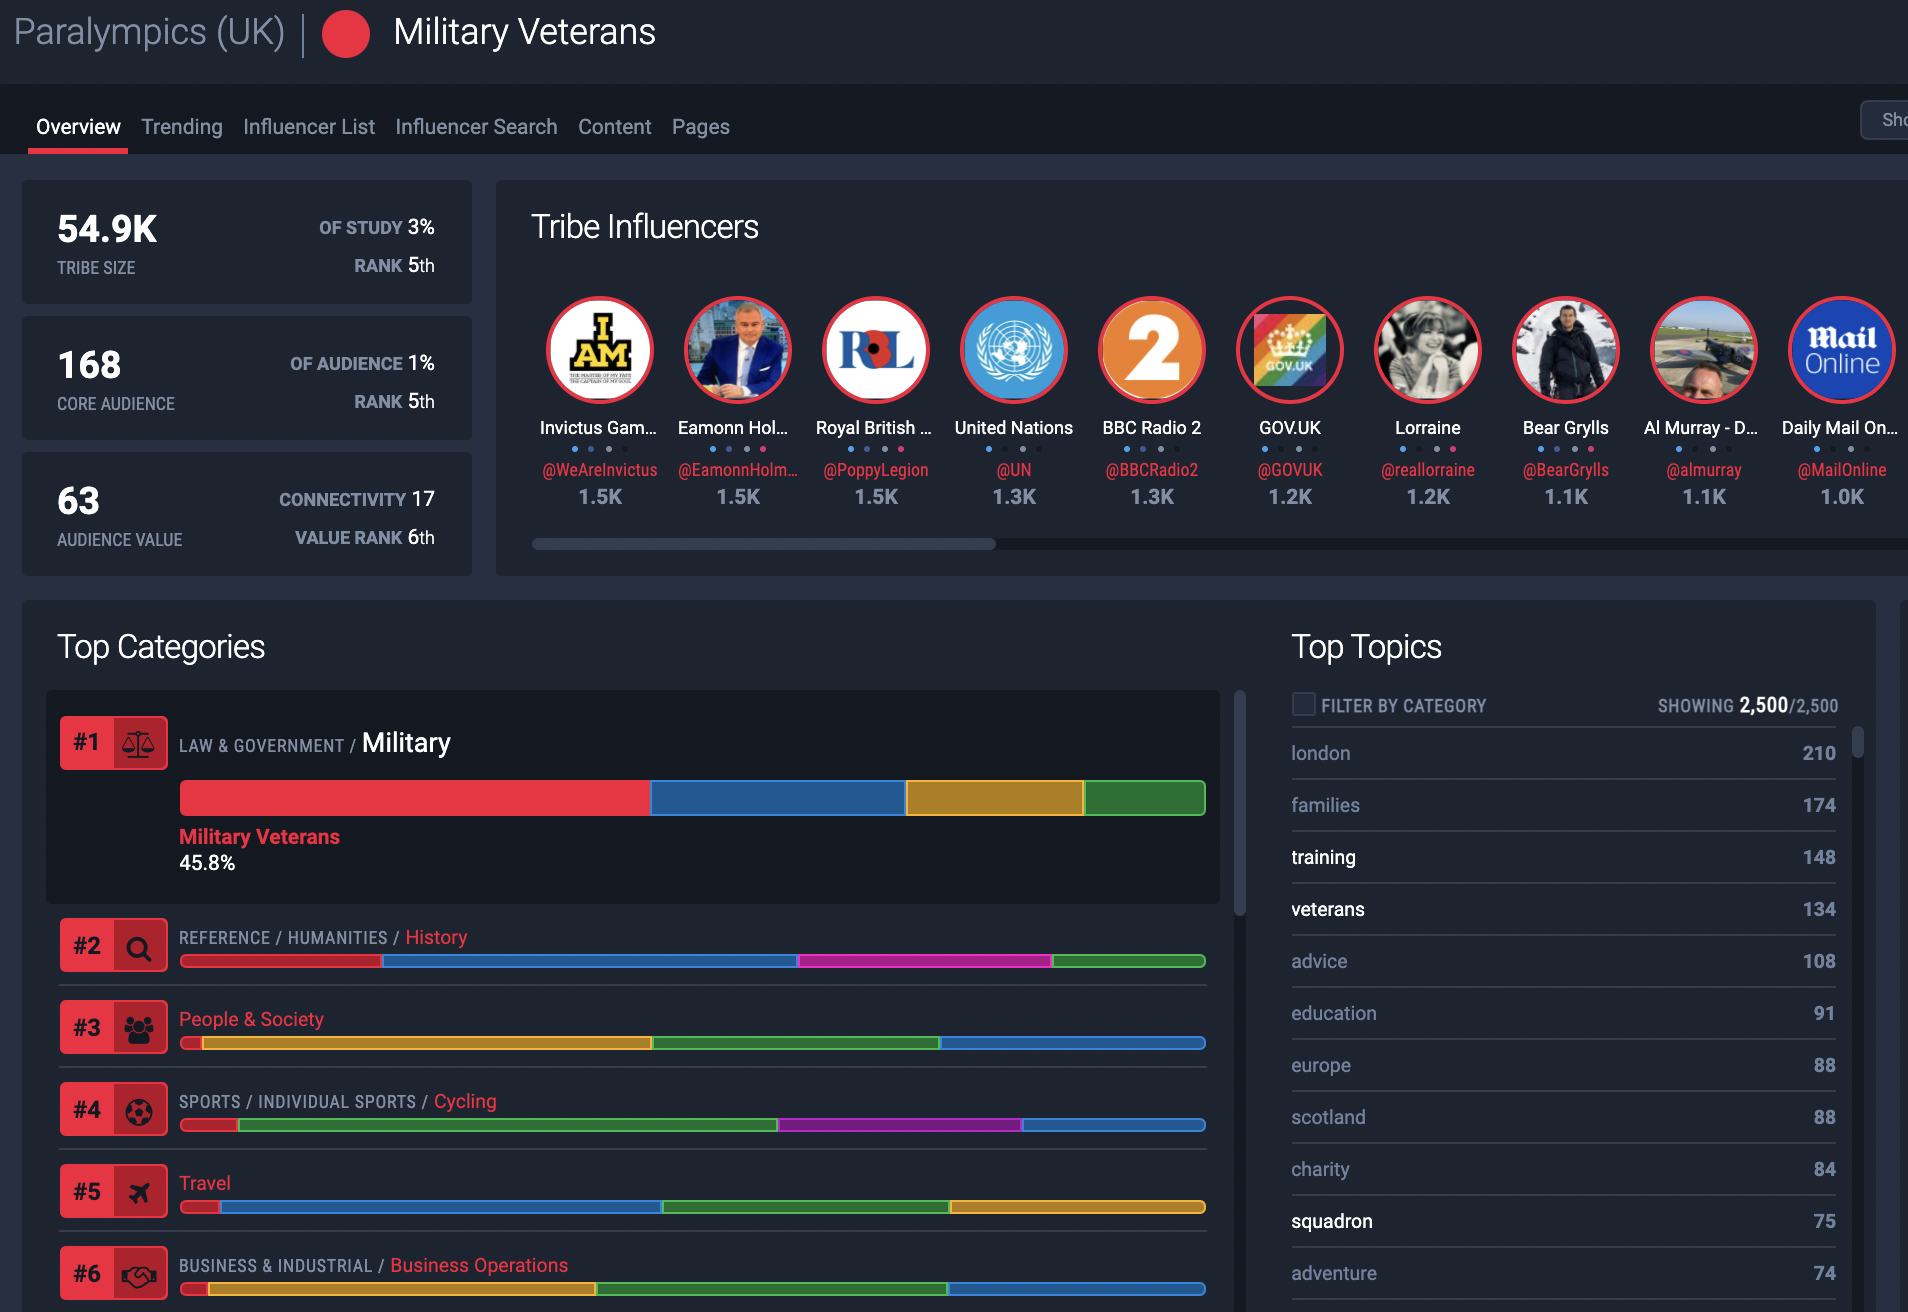 Military Veterans, a key segment within the UK Paralympics audience as shown on the Fifty platform.